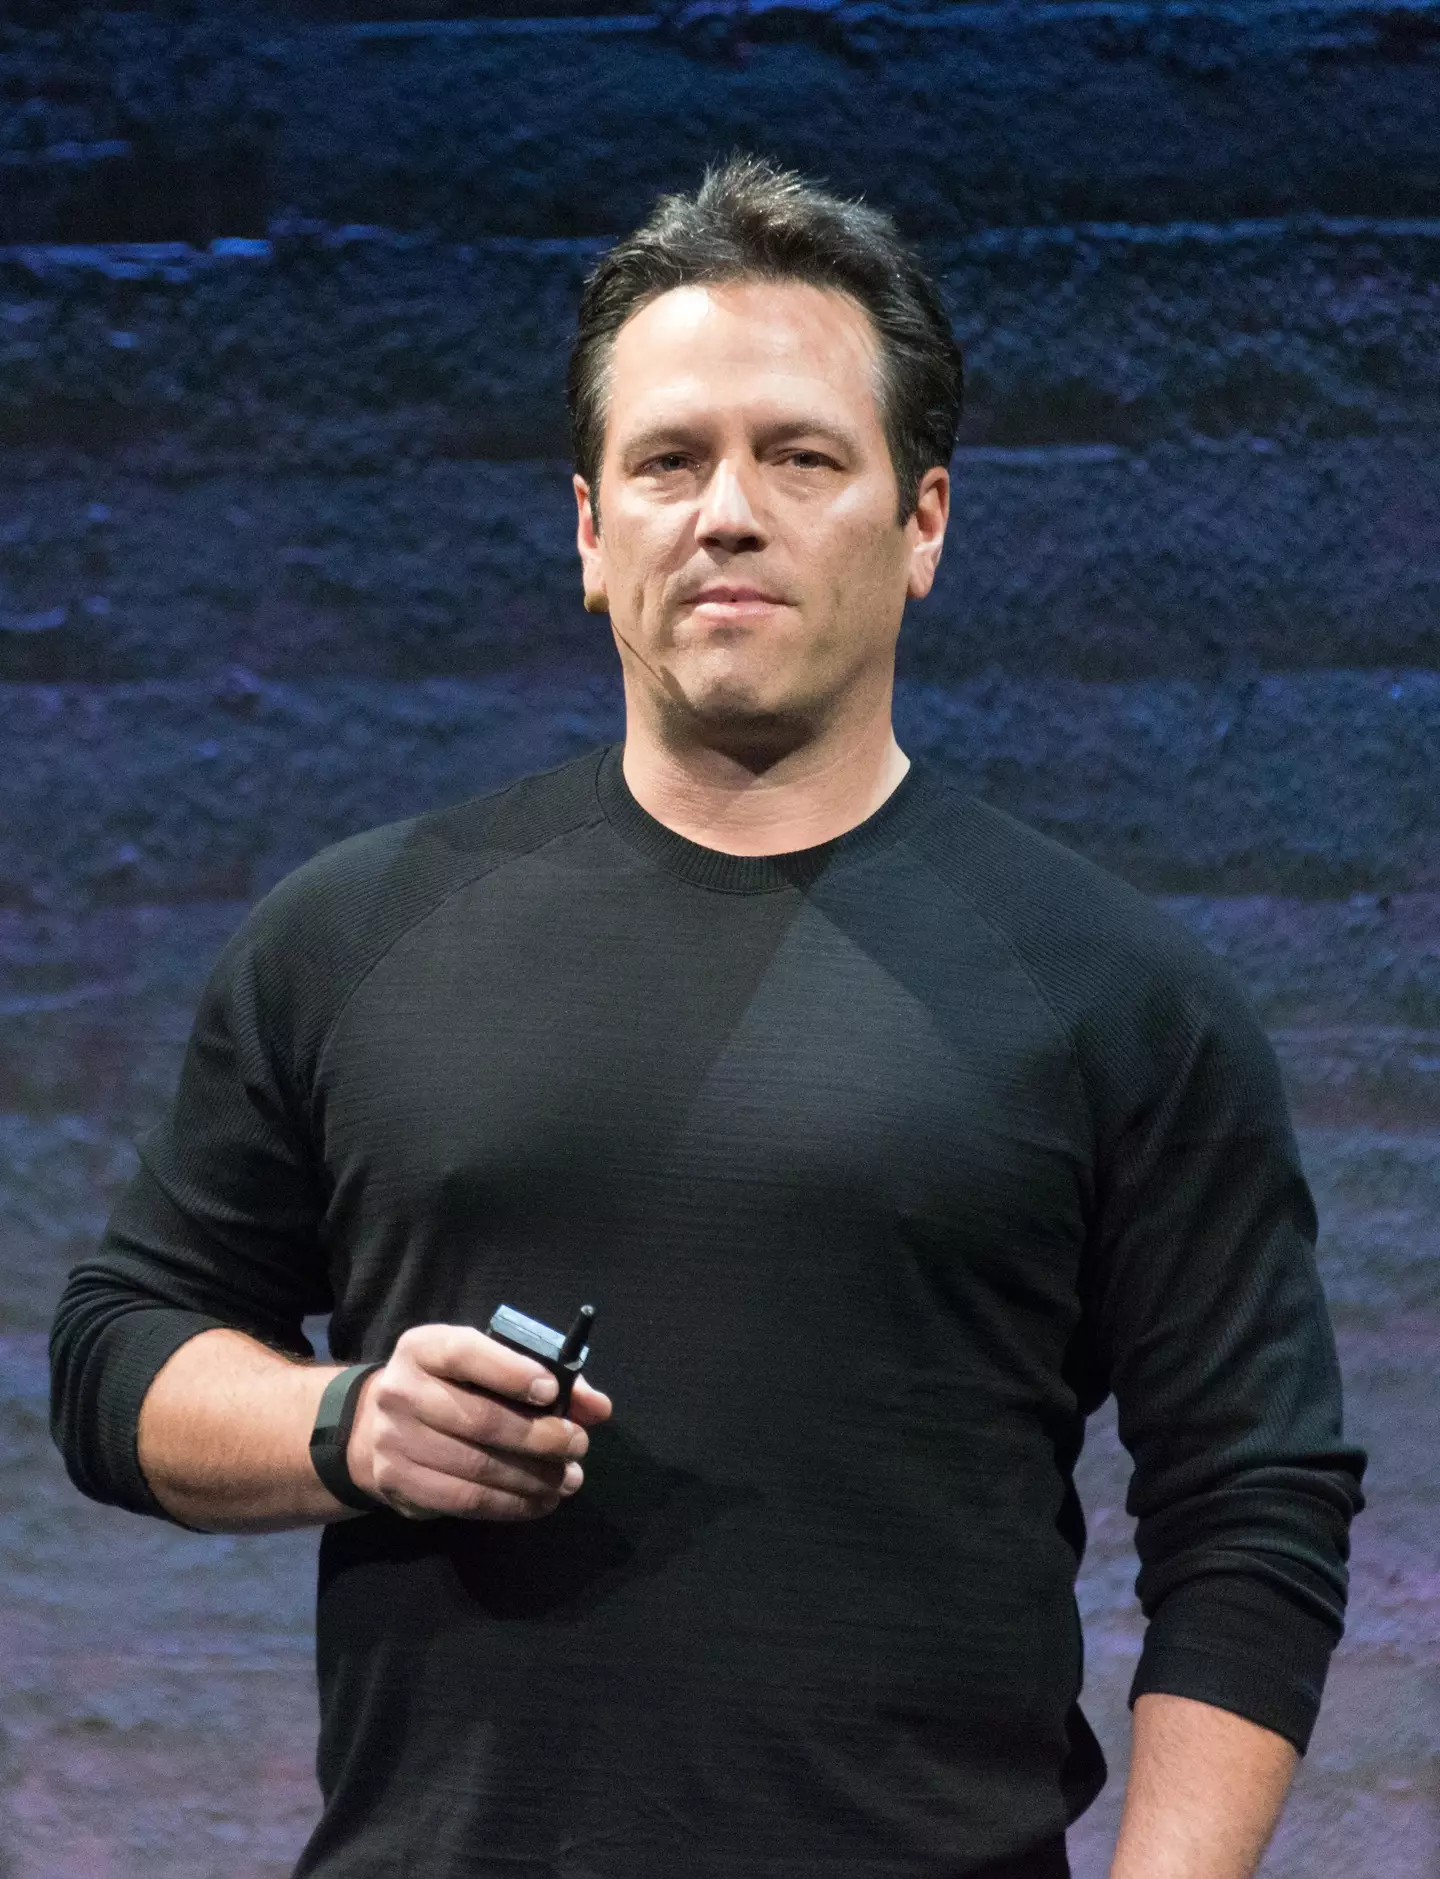 Phil Spencer said Microsoft lost the Xbox One generation.